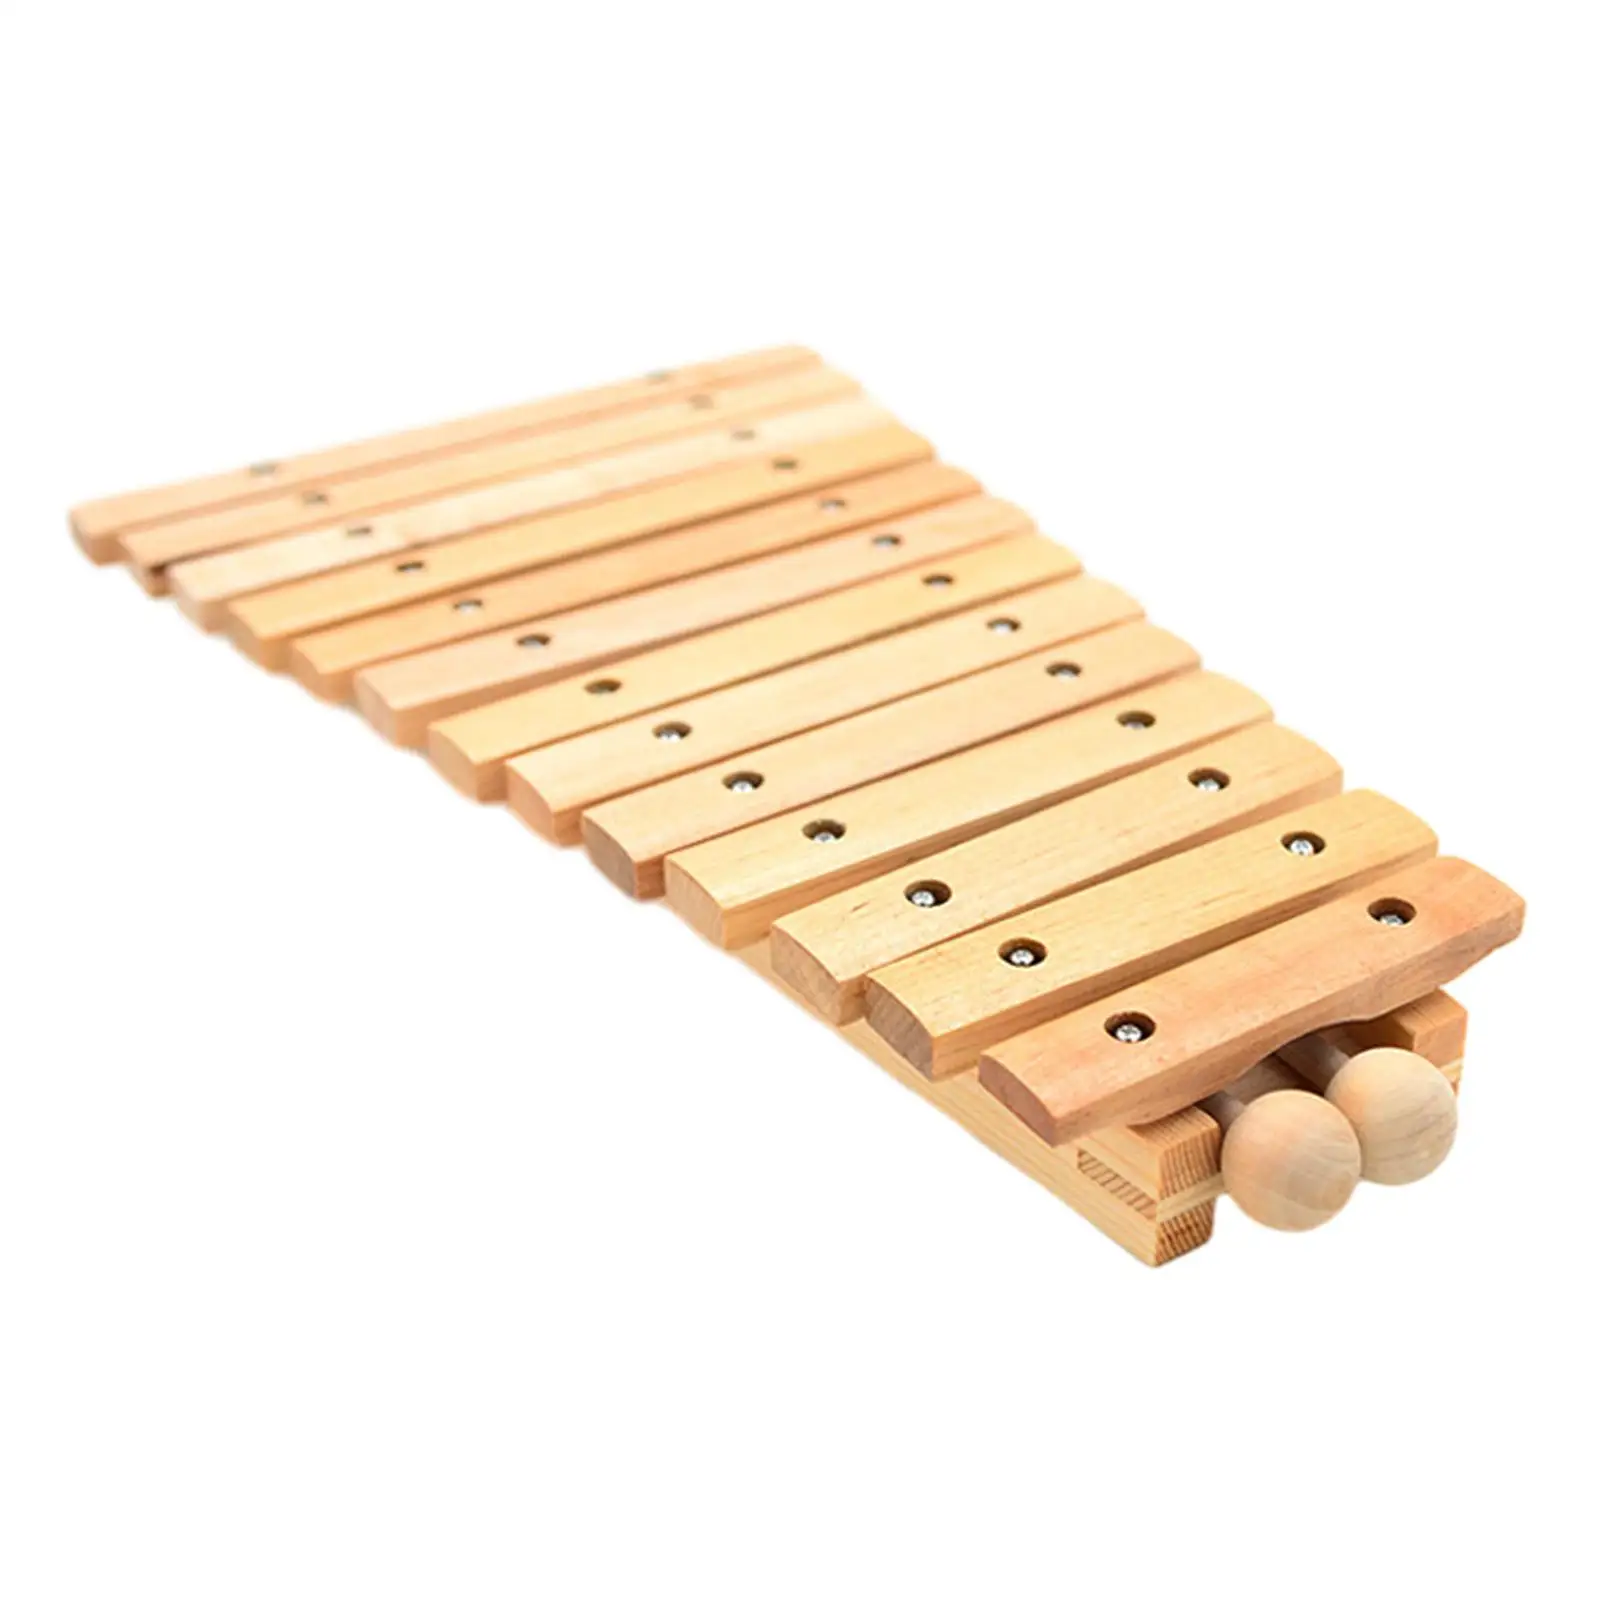 13 Note Glockenspiel Hand Knock Piano Toy for Home Outside Family Sessions